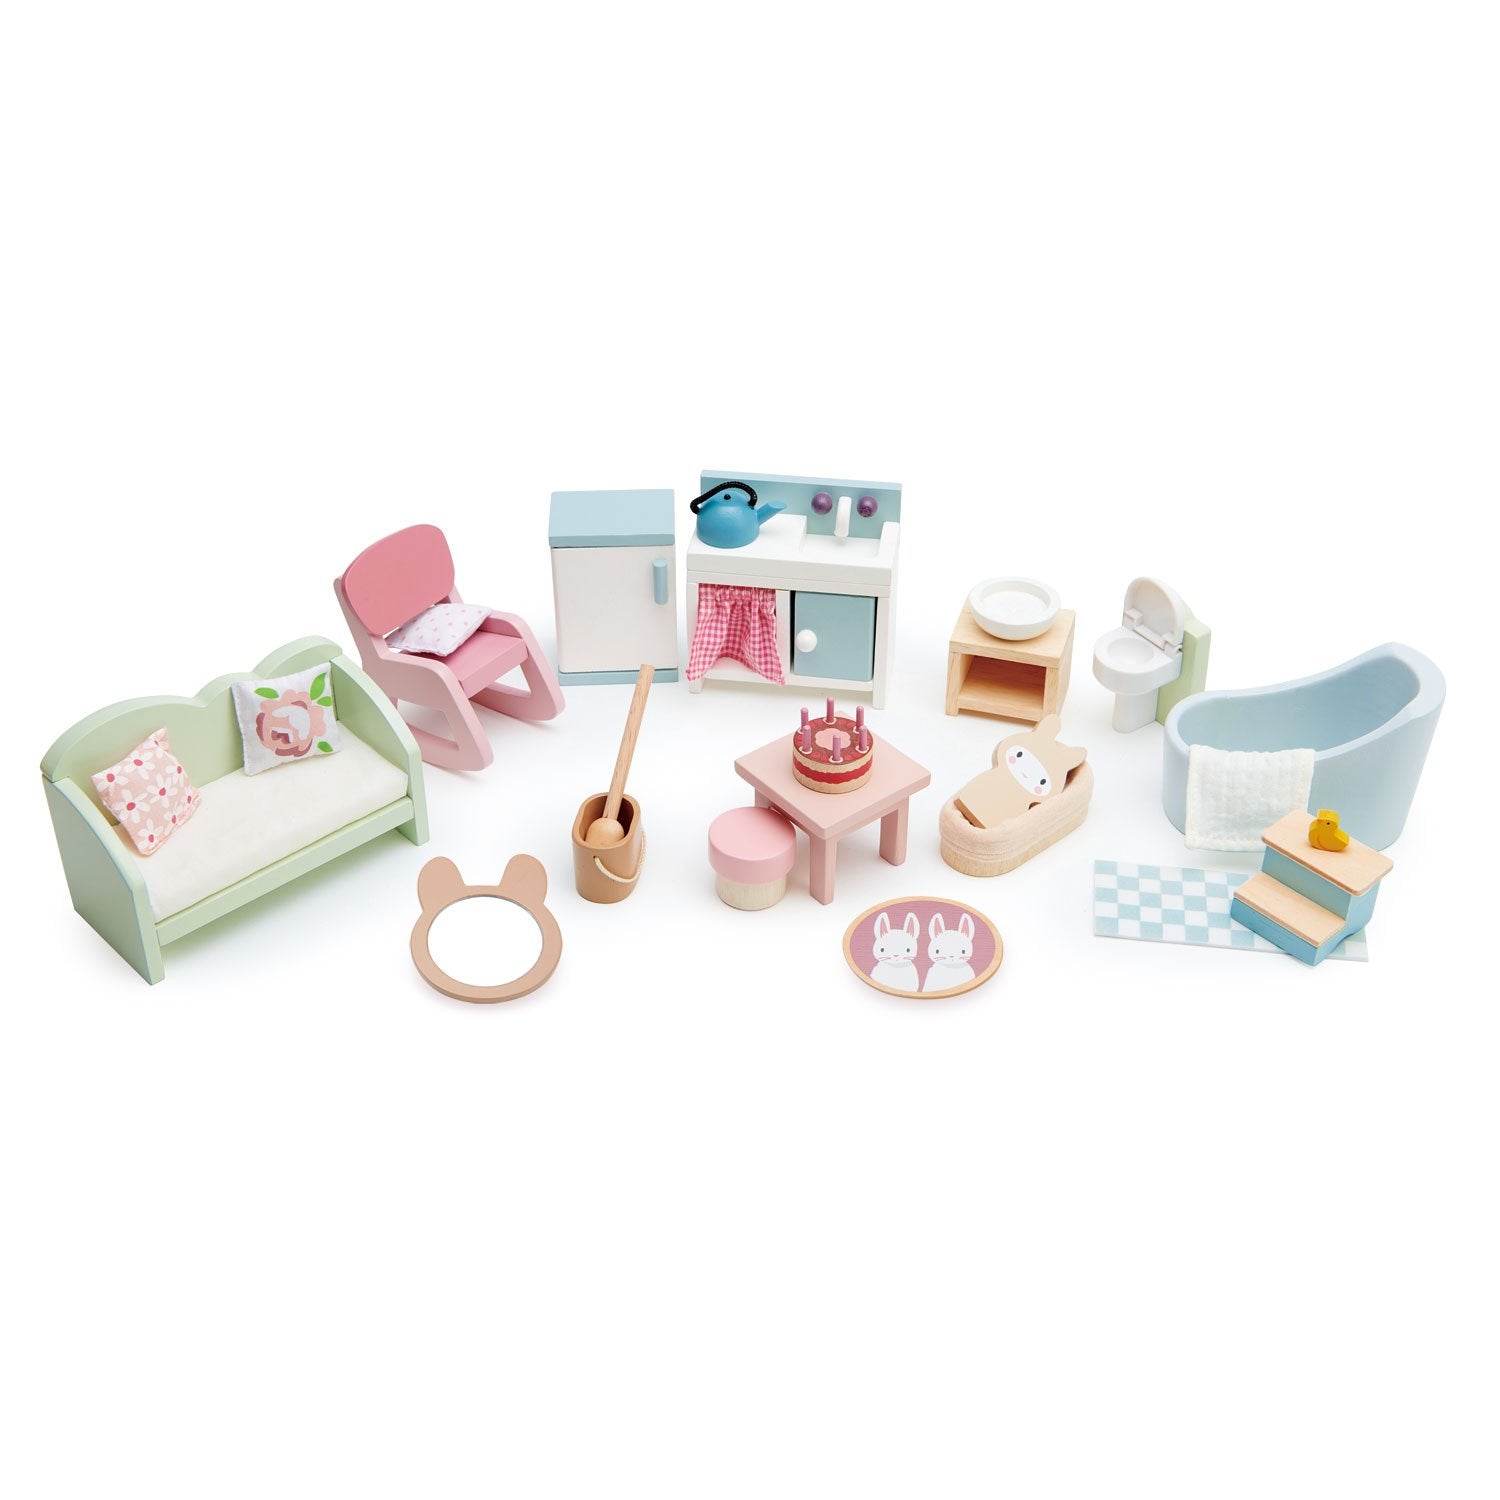 Dolls House Countryside Room Furniture by Tender Leaf Toys